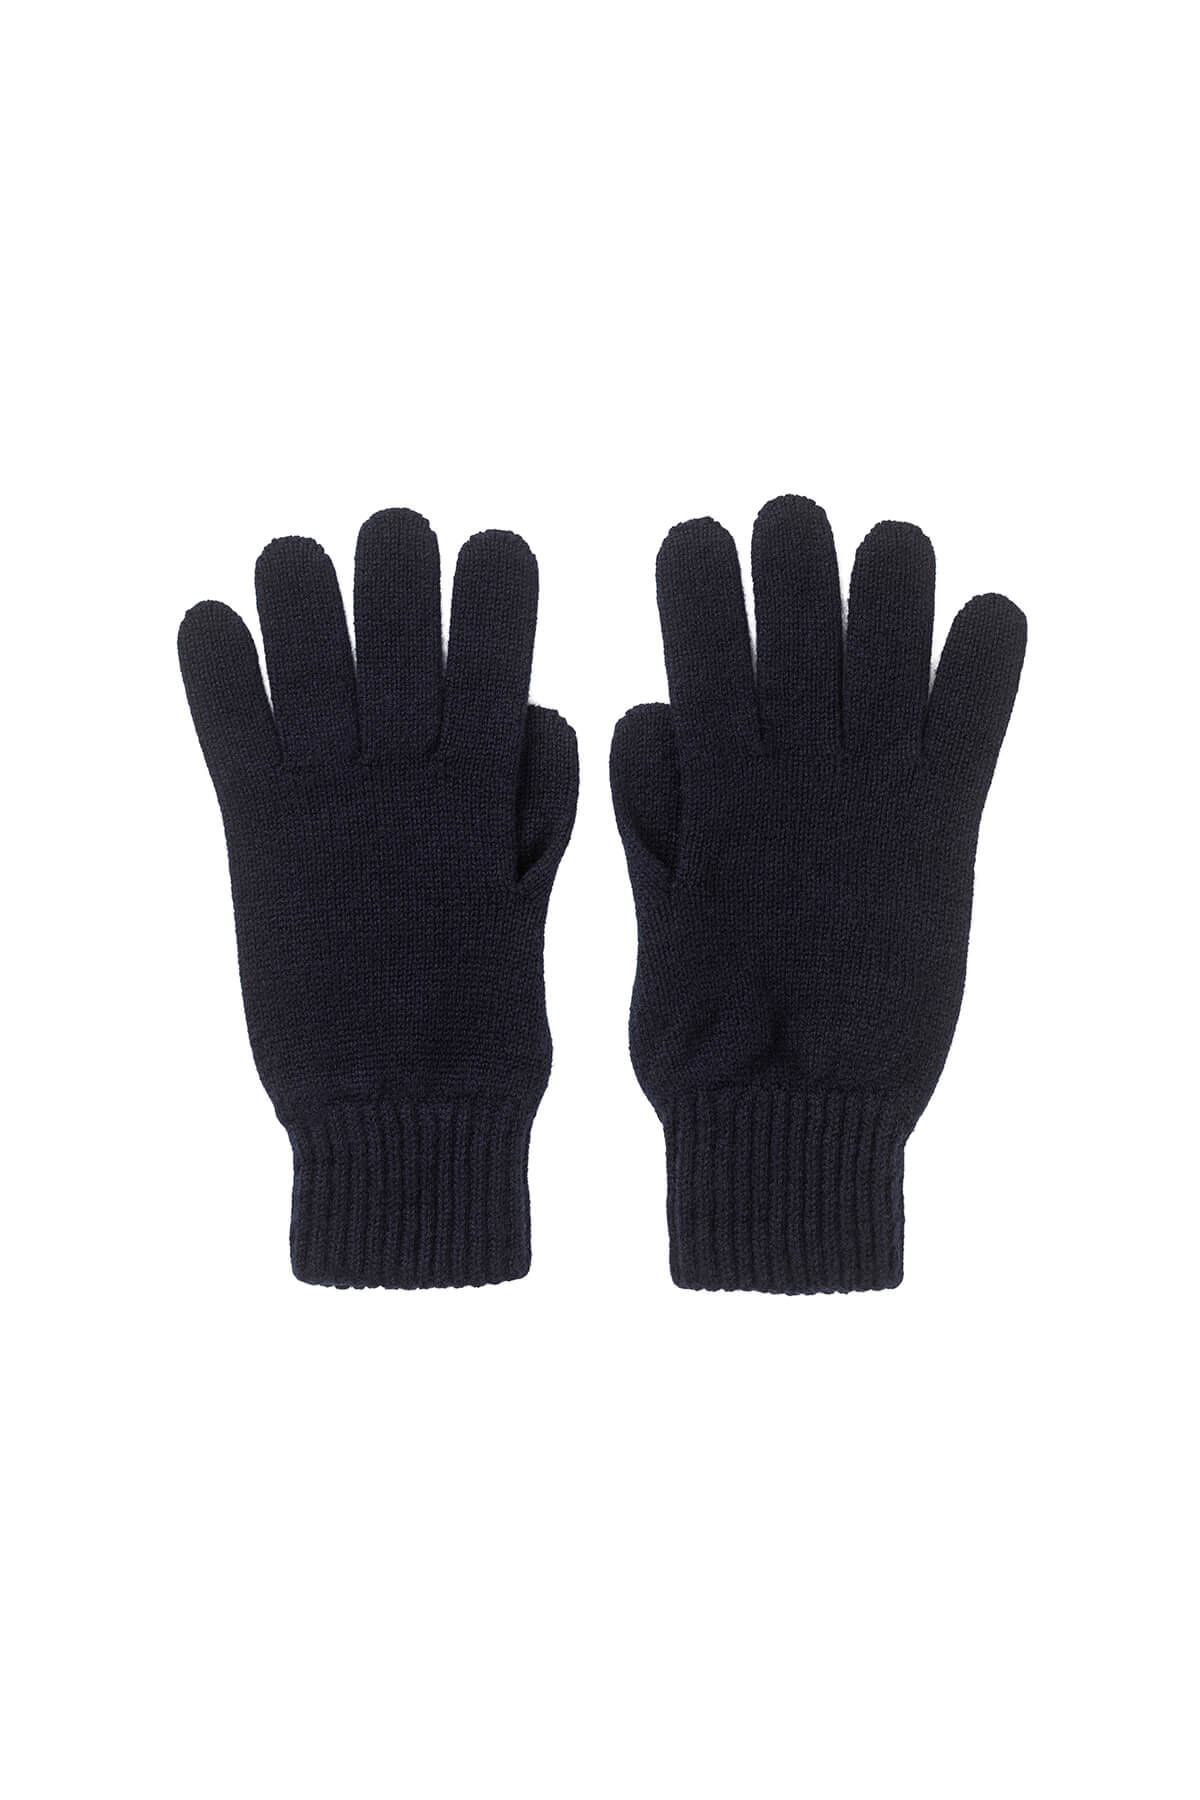 Johnstons of Elgin Men's Cashmere Accessories Gift Set Navy Gloves on a white background 365GIFTSET6A